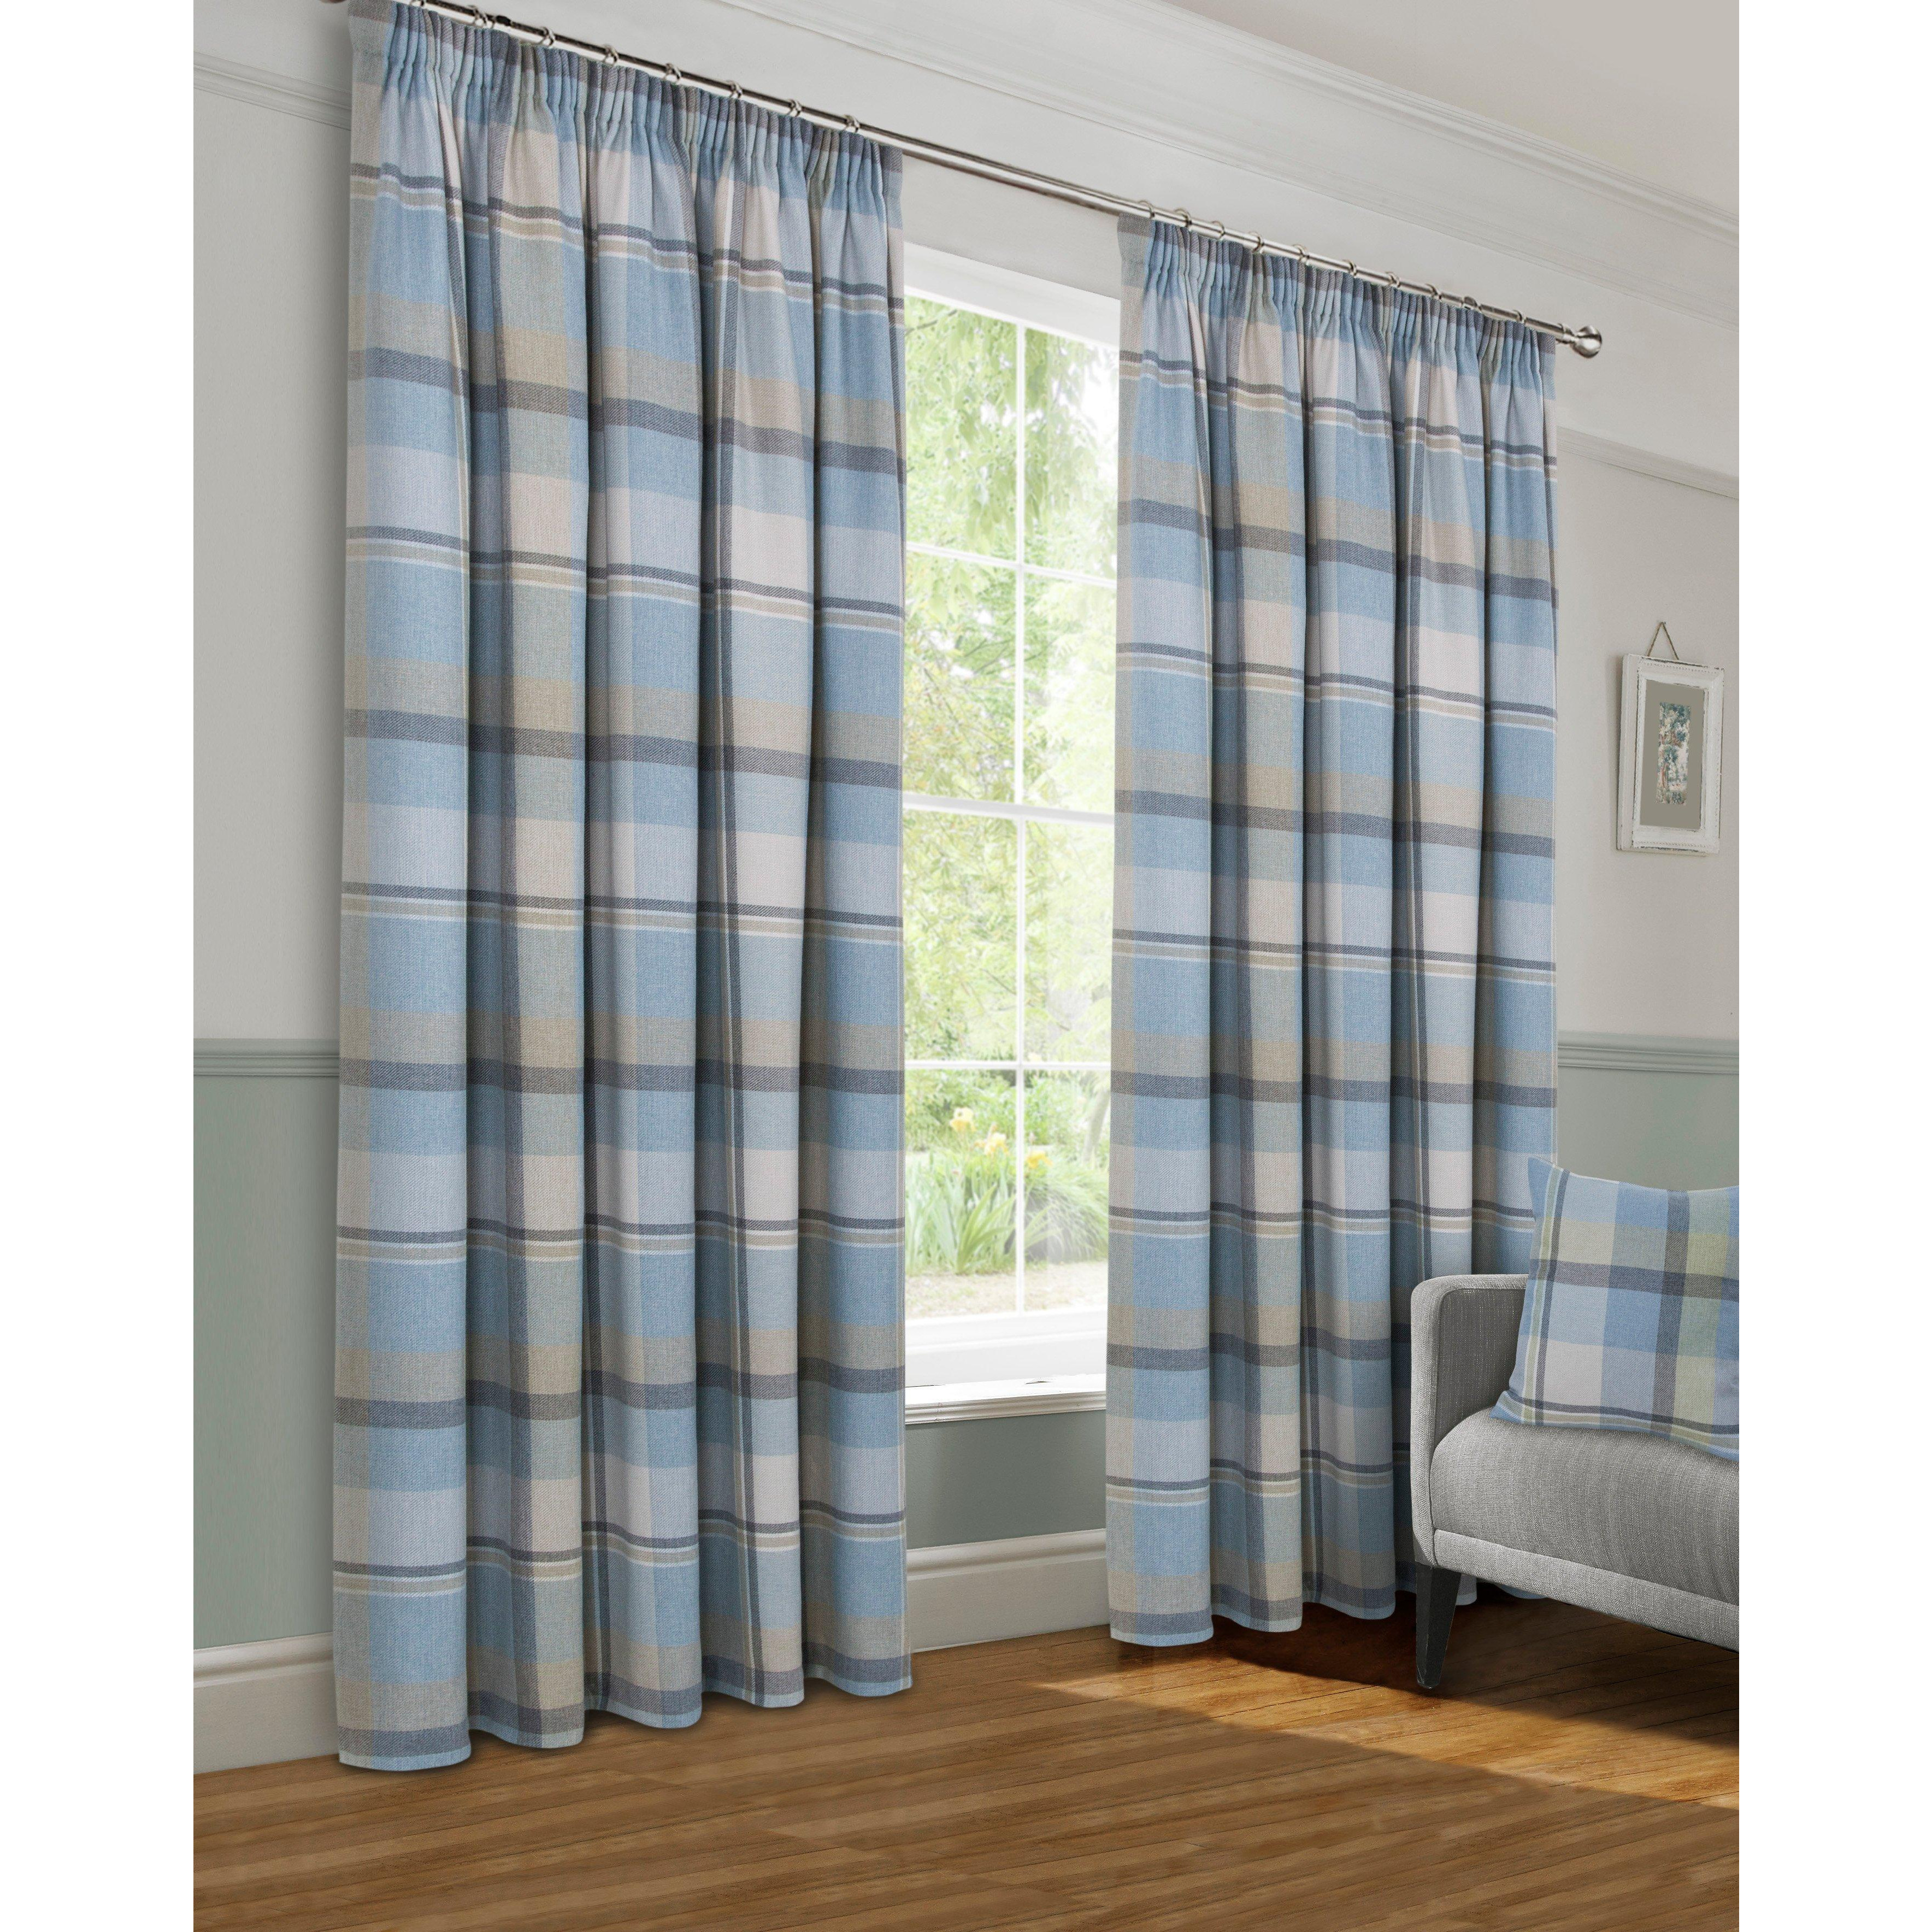 Braemar Faux Wool Fully Lined 3 Inches Pencil Pleat Curtains pair - image 1